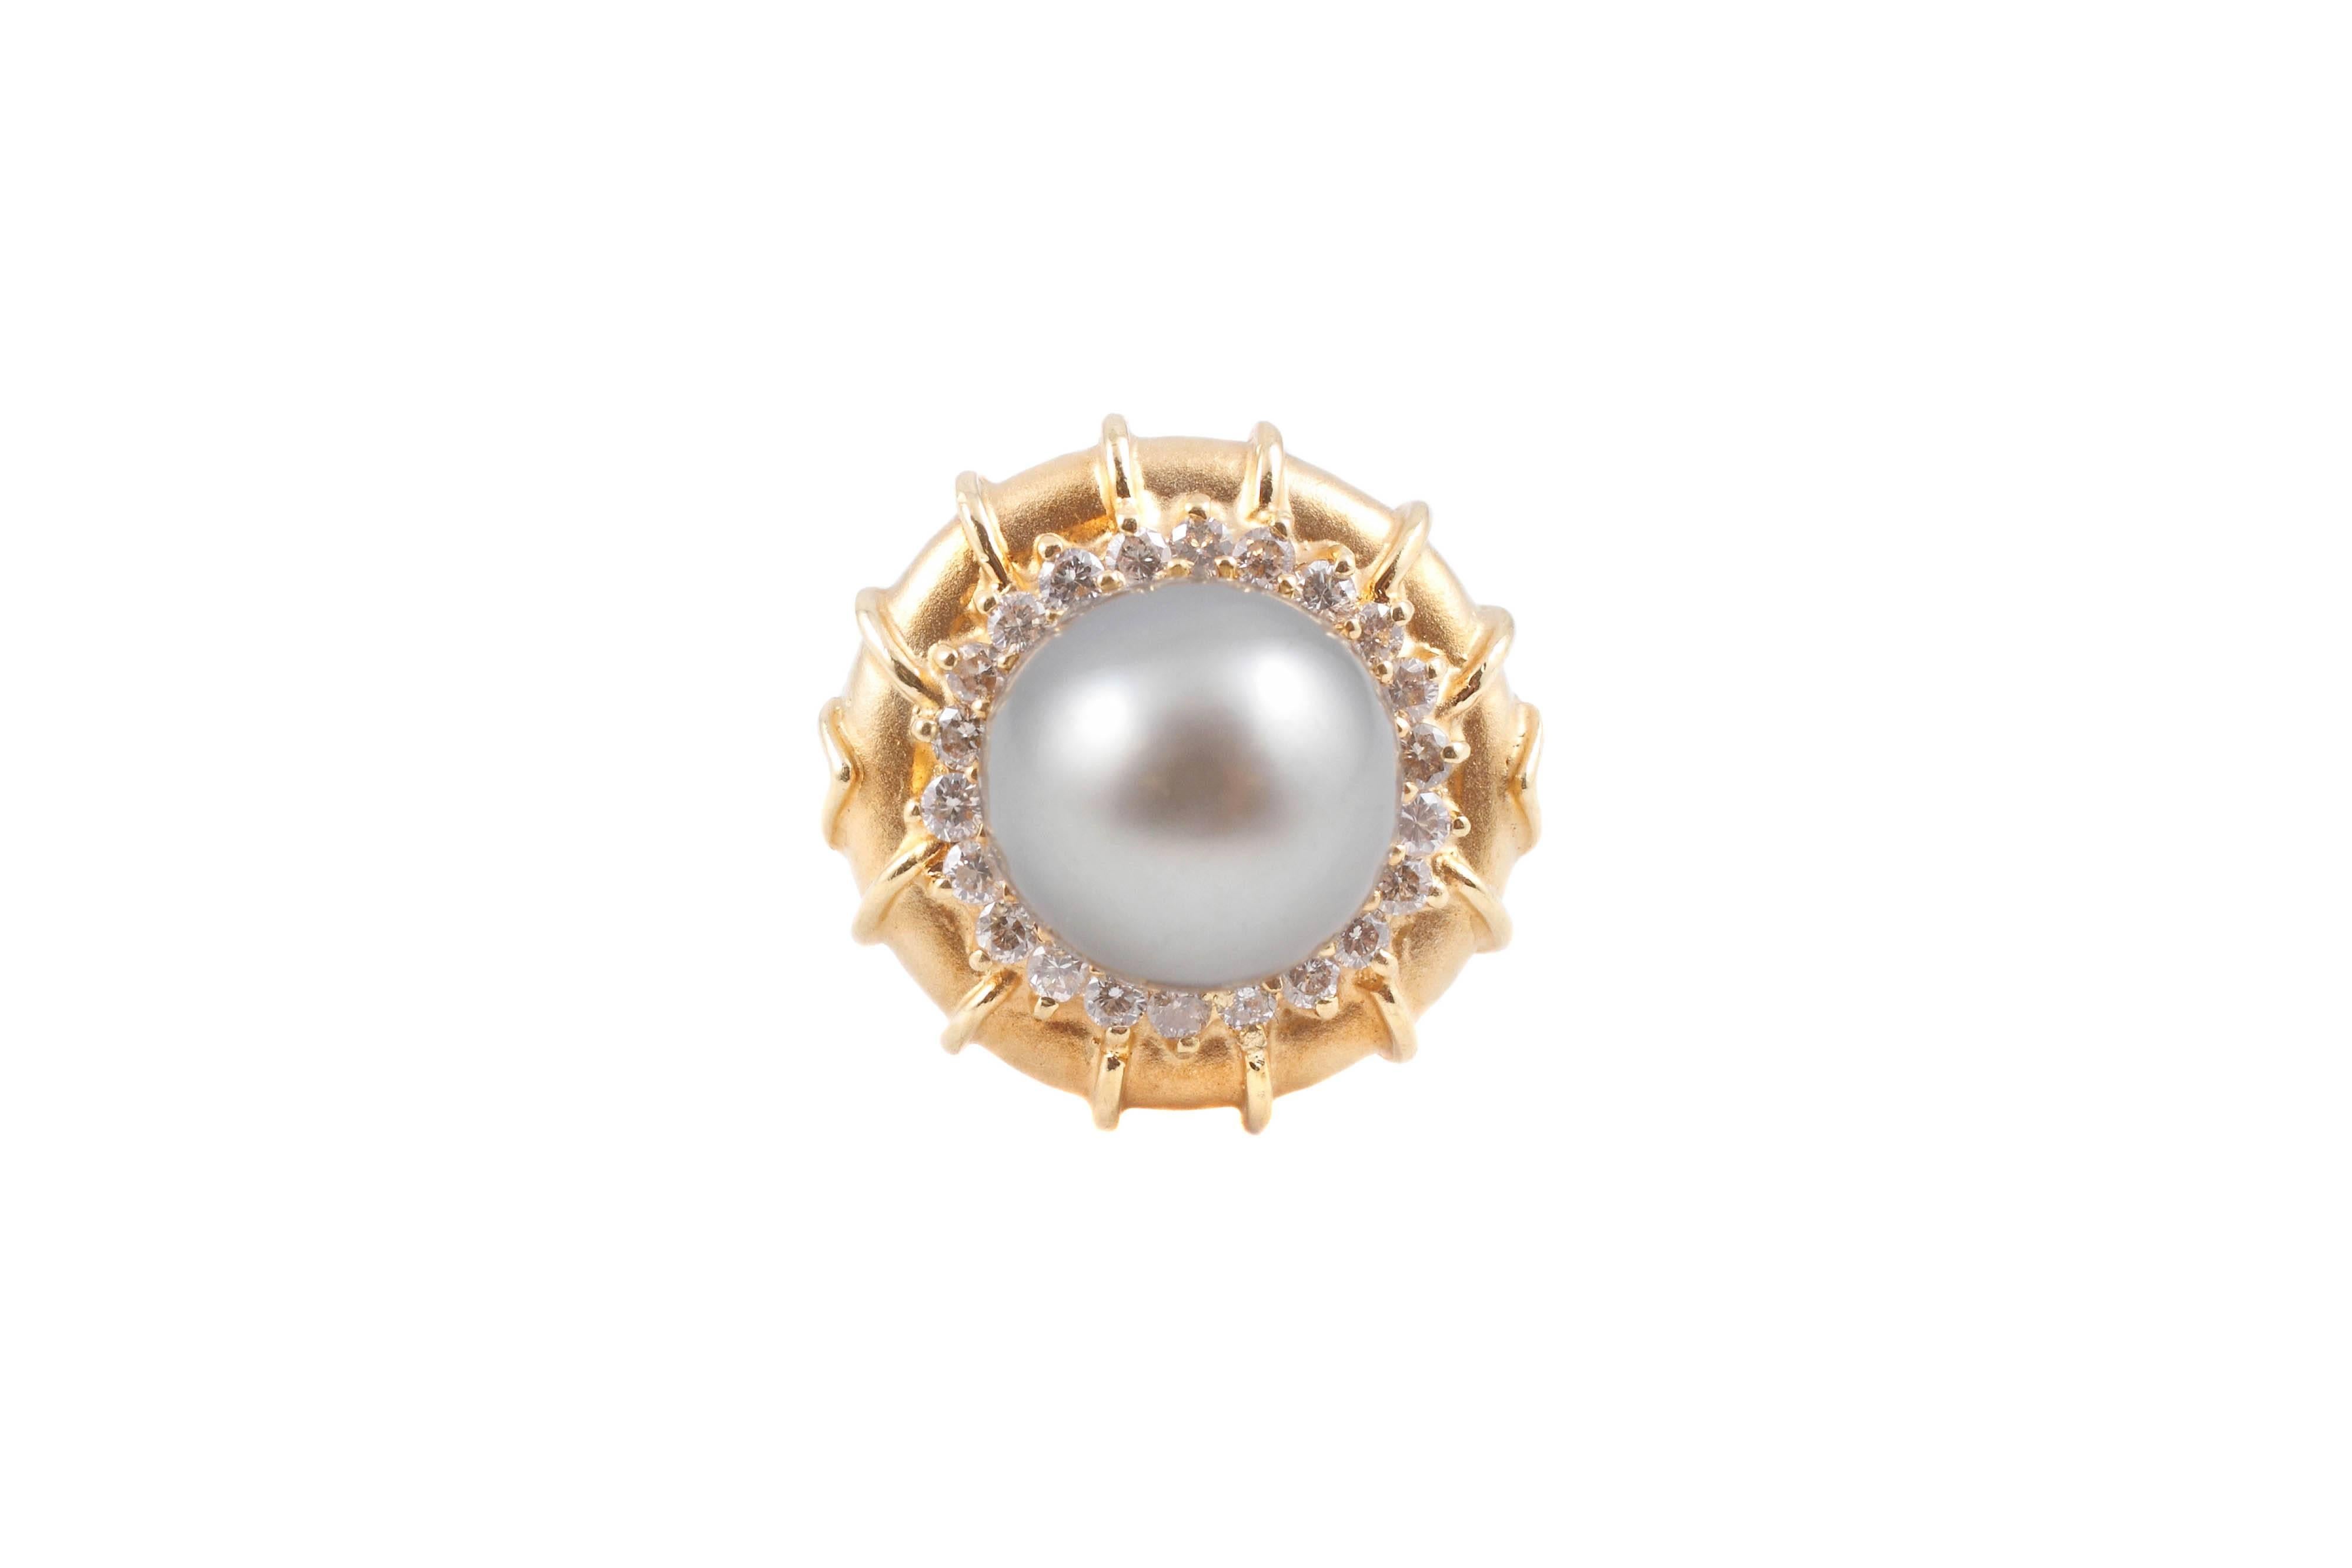 Very unusual to see a natural color Tahitian cultured pearl in a yellow gold mounting!  18 karat yellow gold at that and encircled with diamonds!  in a size 5 3/4.  